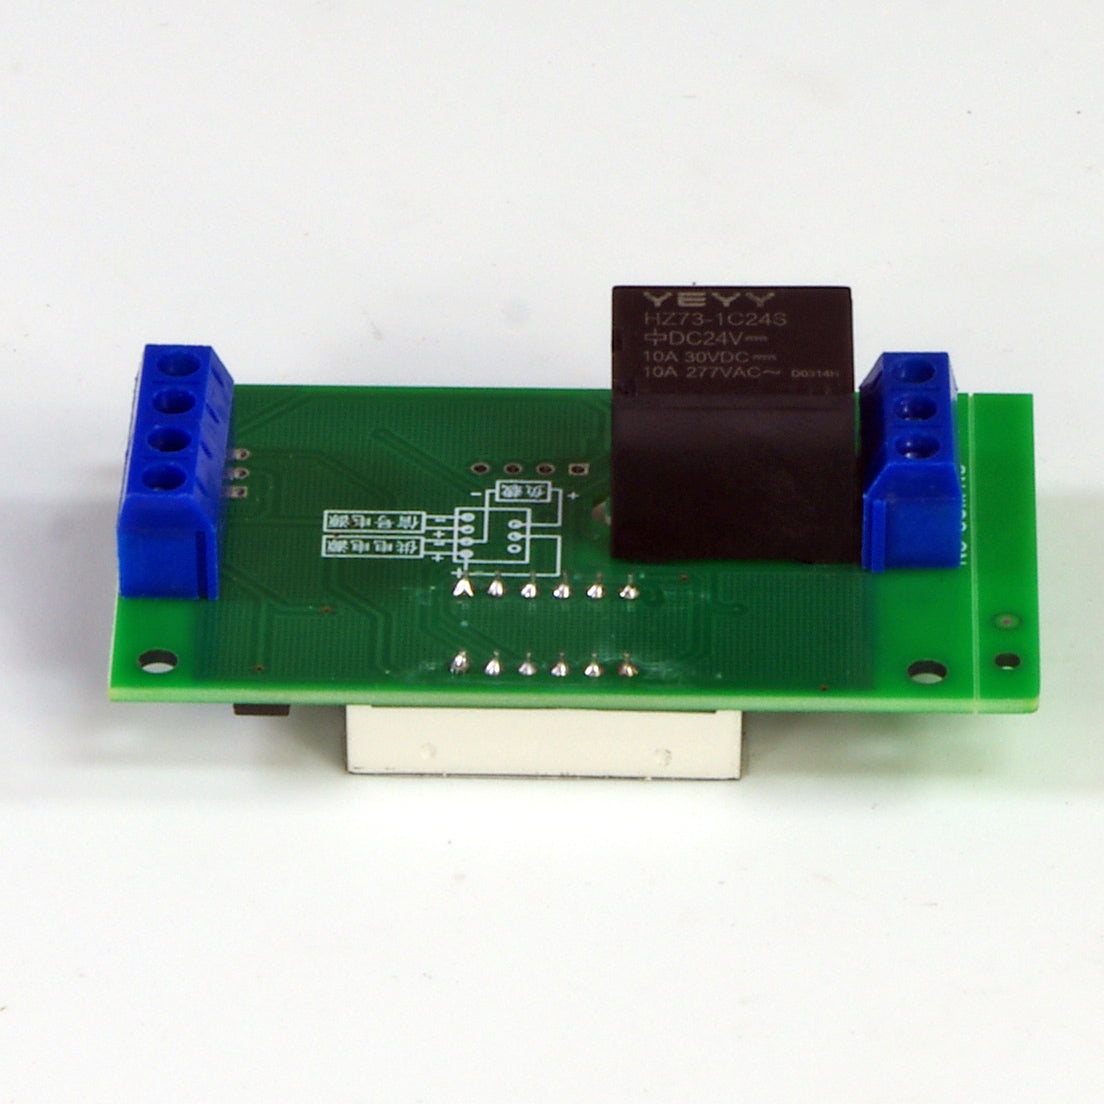 Rubber Roller Delay Control PCB - DTF 24" Shaker